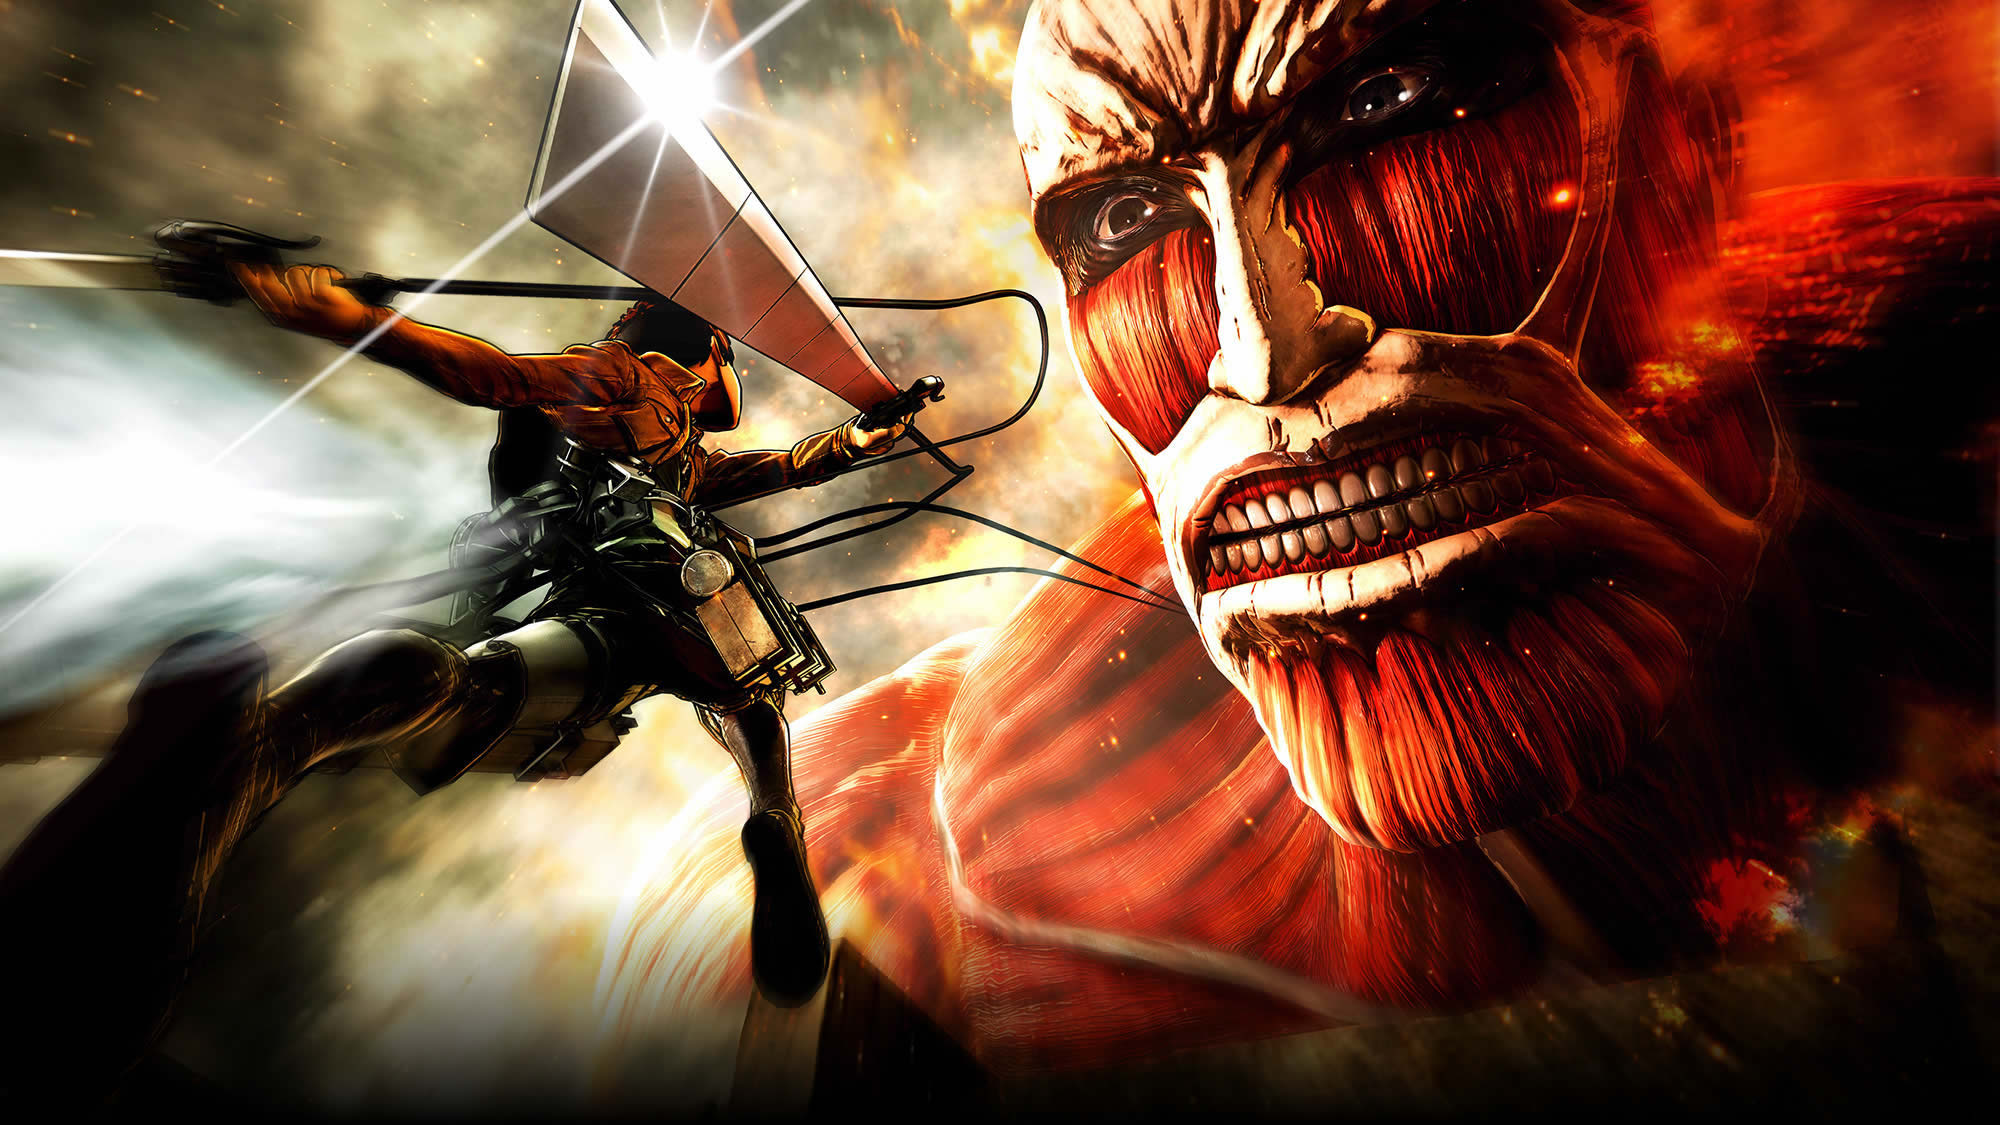 anime, attack on titan, blade, colossal titan, eren yeager, weapon